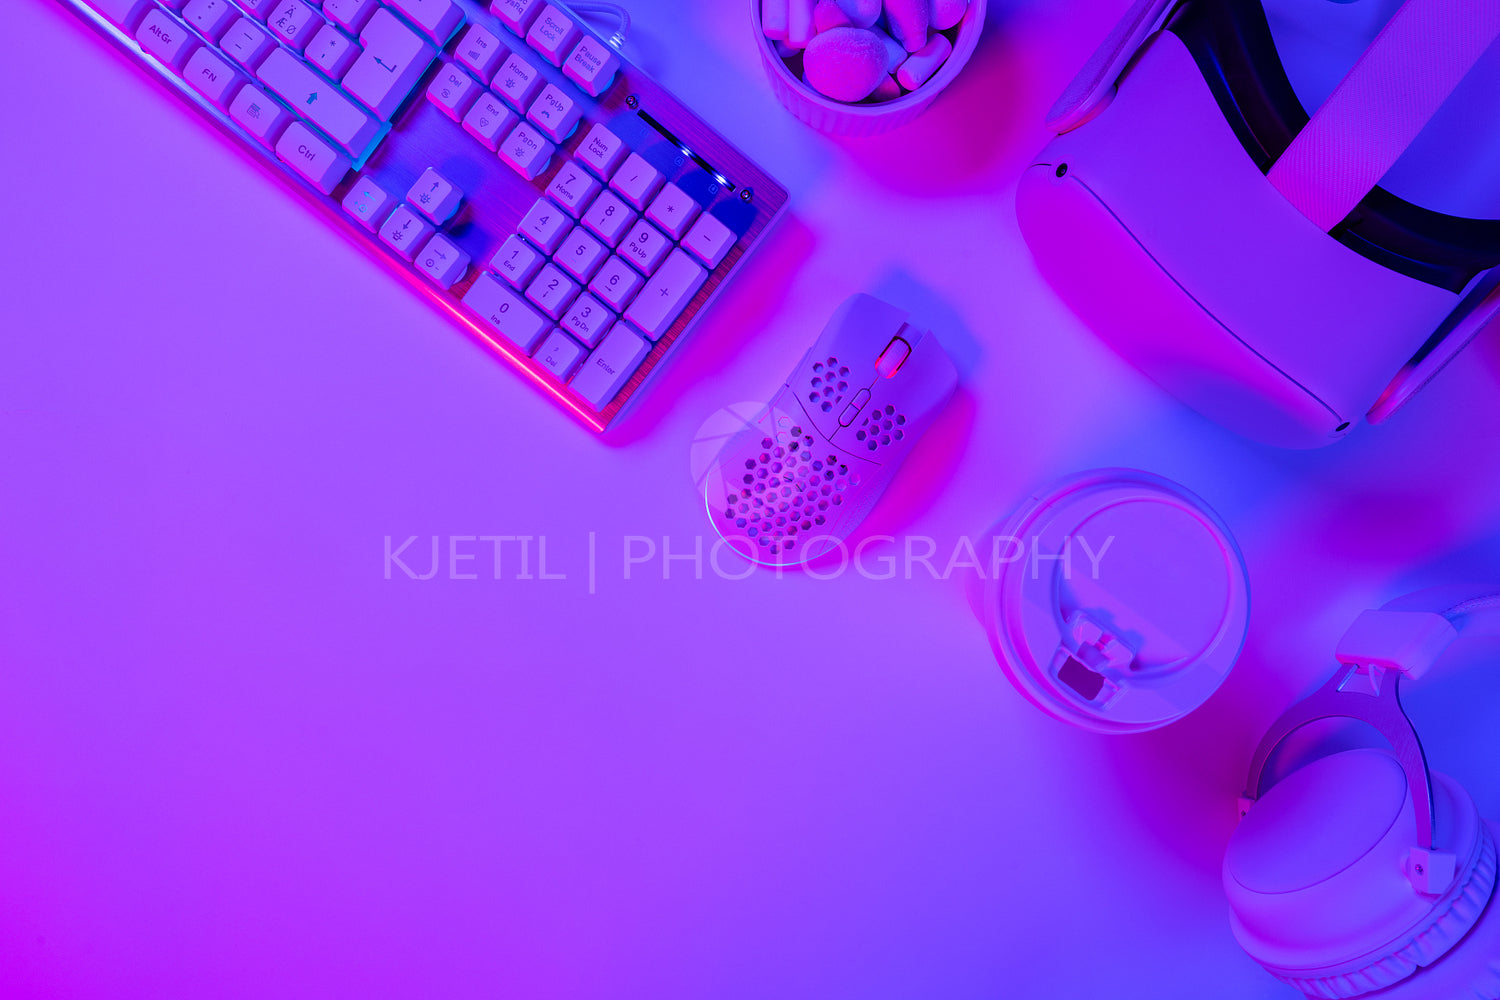 Keyboard with mouse and disposable cup on desk